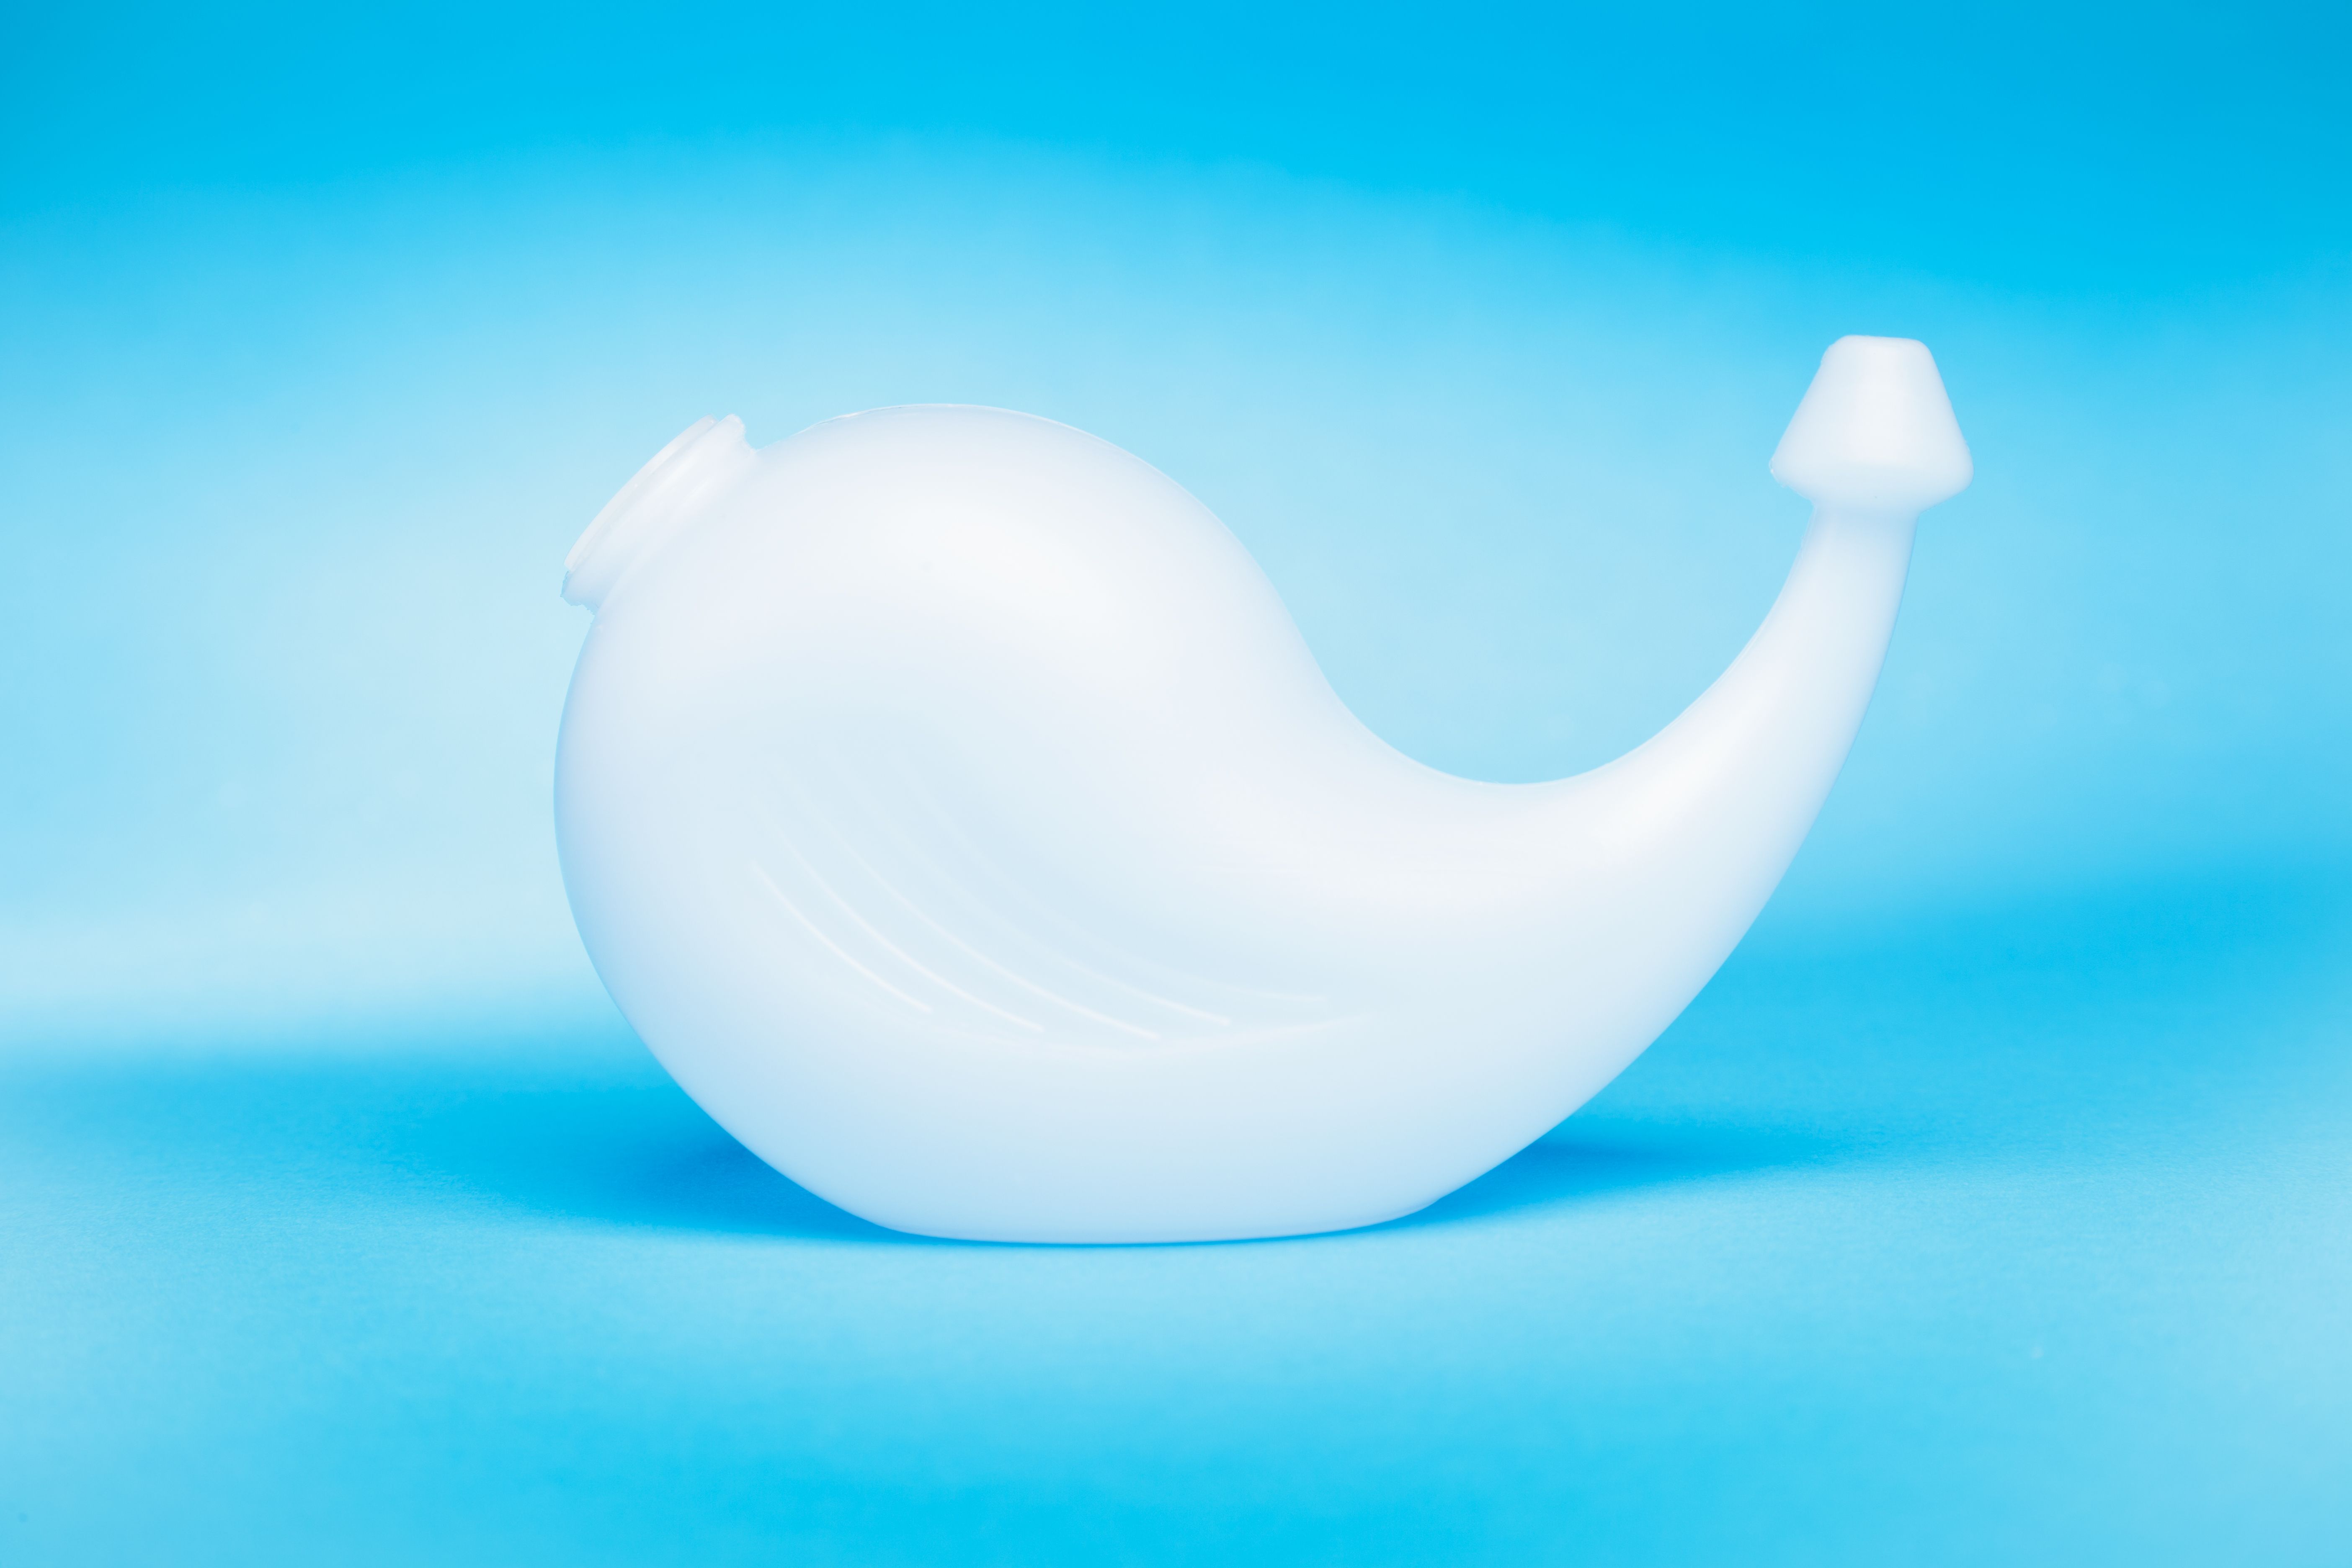 How to Use a Neti Pot Safely to Relieve Congestion